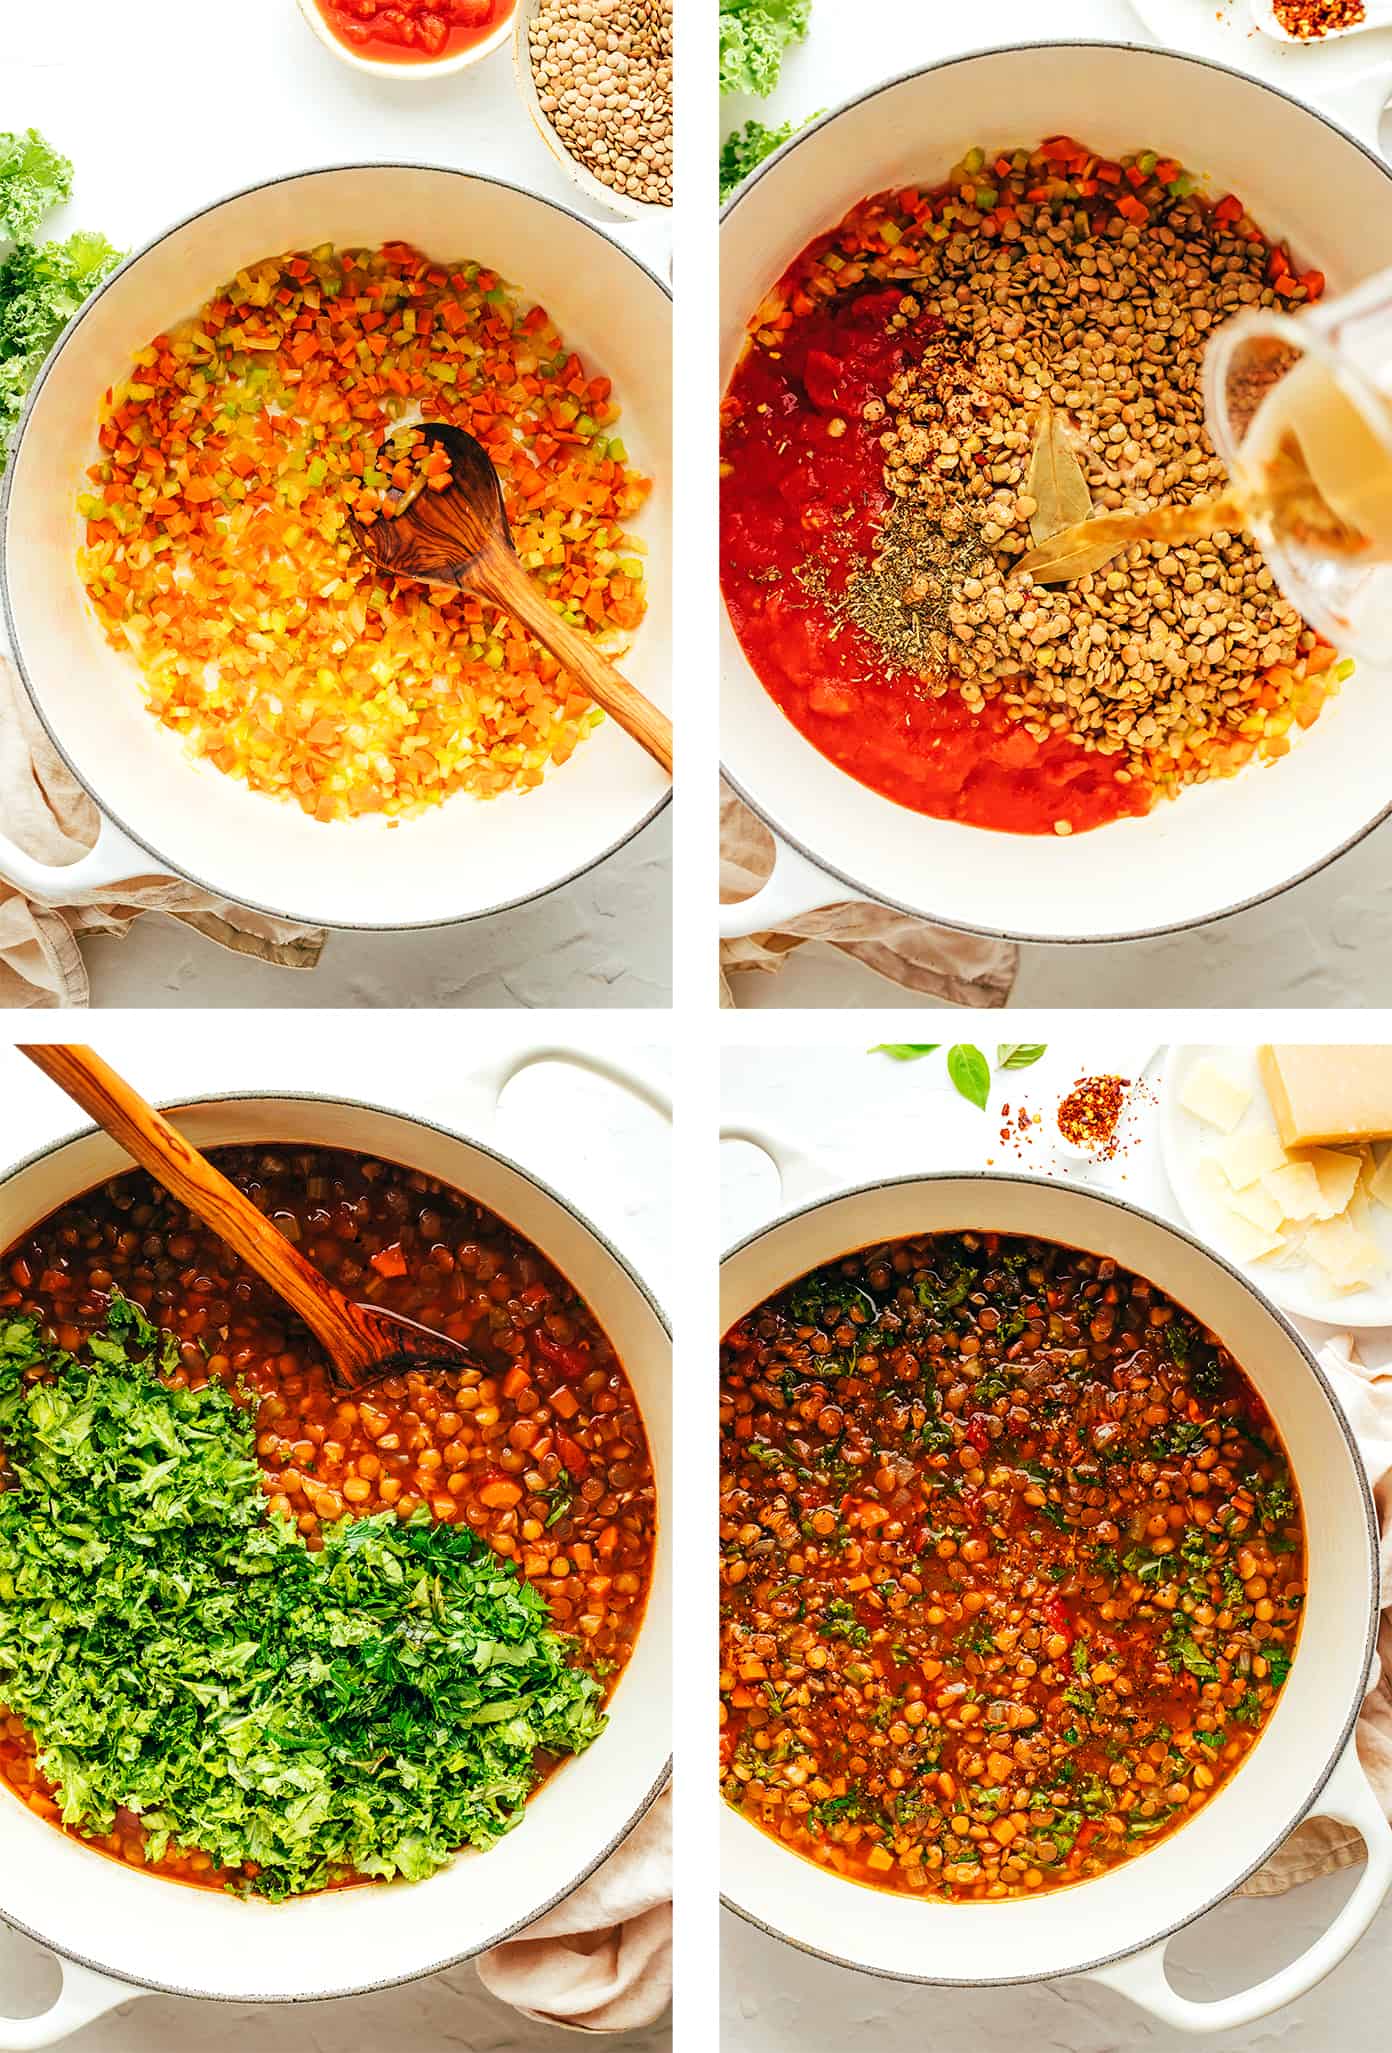 Step by step photo tutorial showing how to make lentil soup